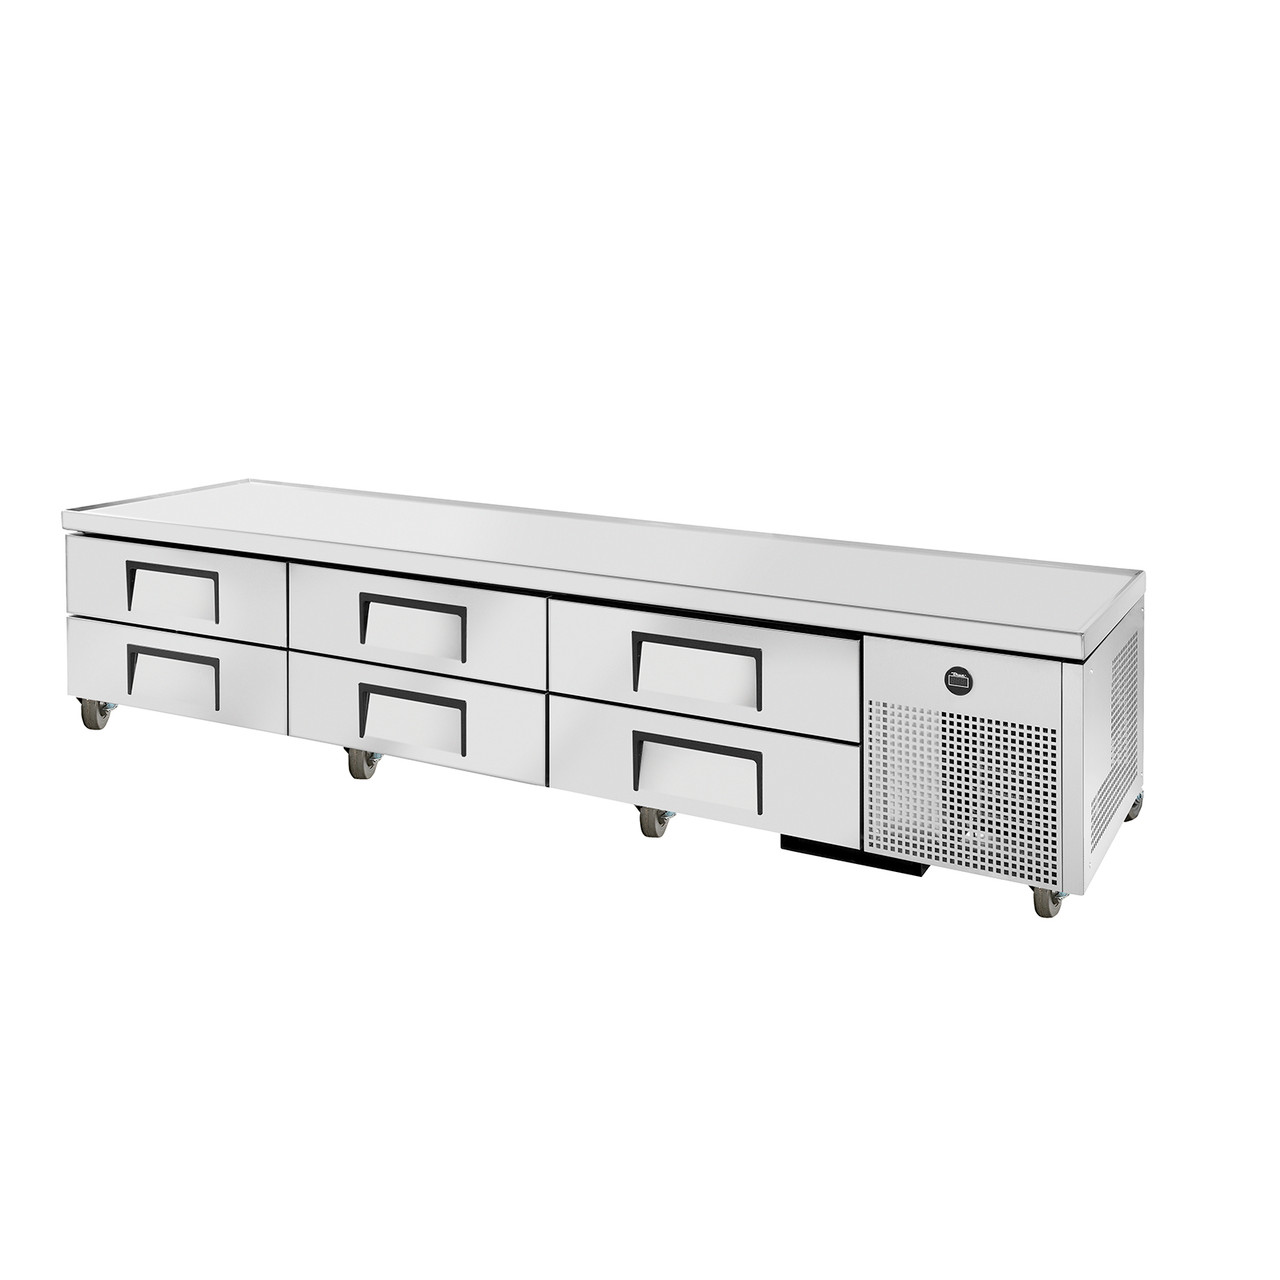 True Manufacturing TRCB-110 Refrigerated Chef's Base 110"